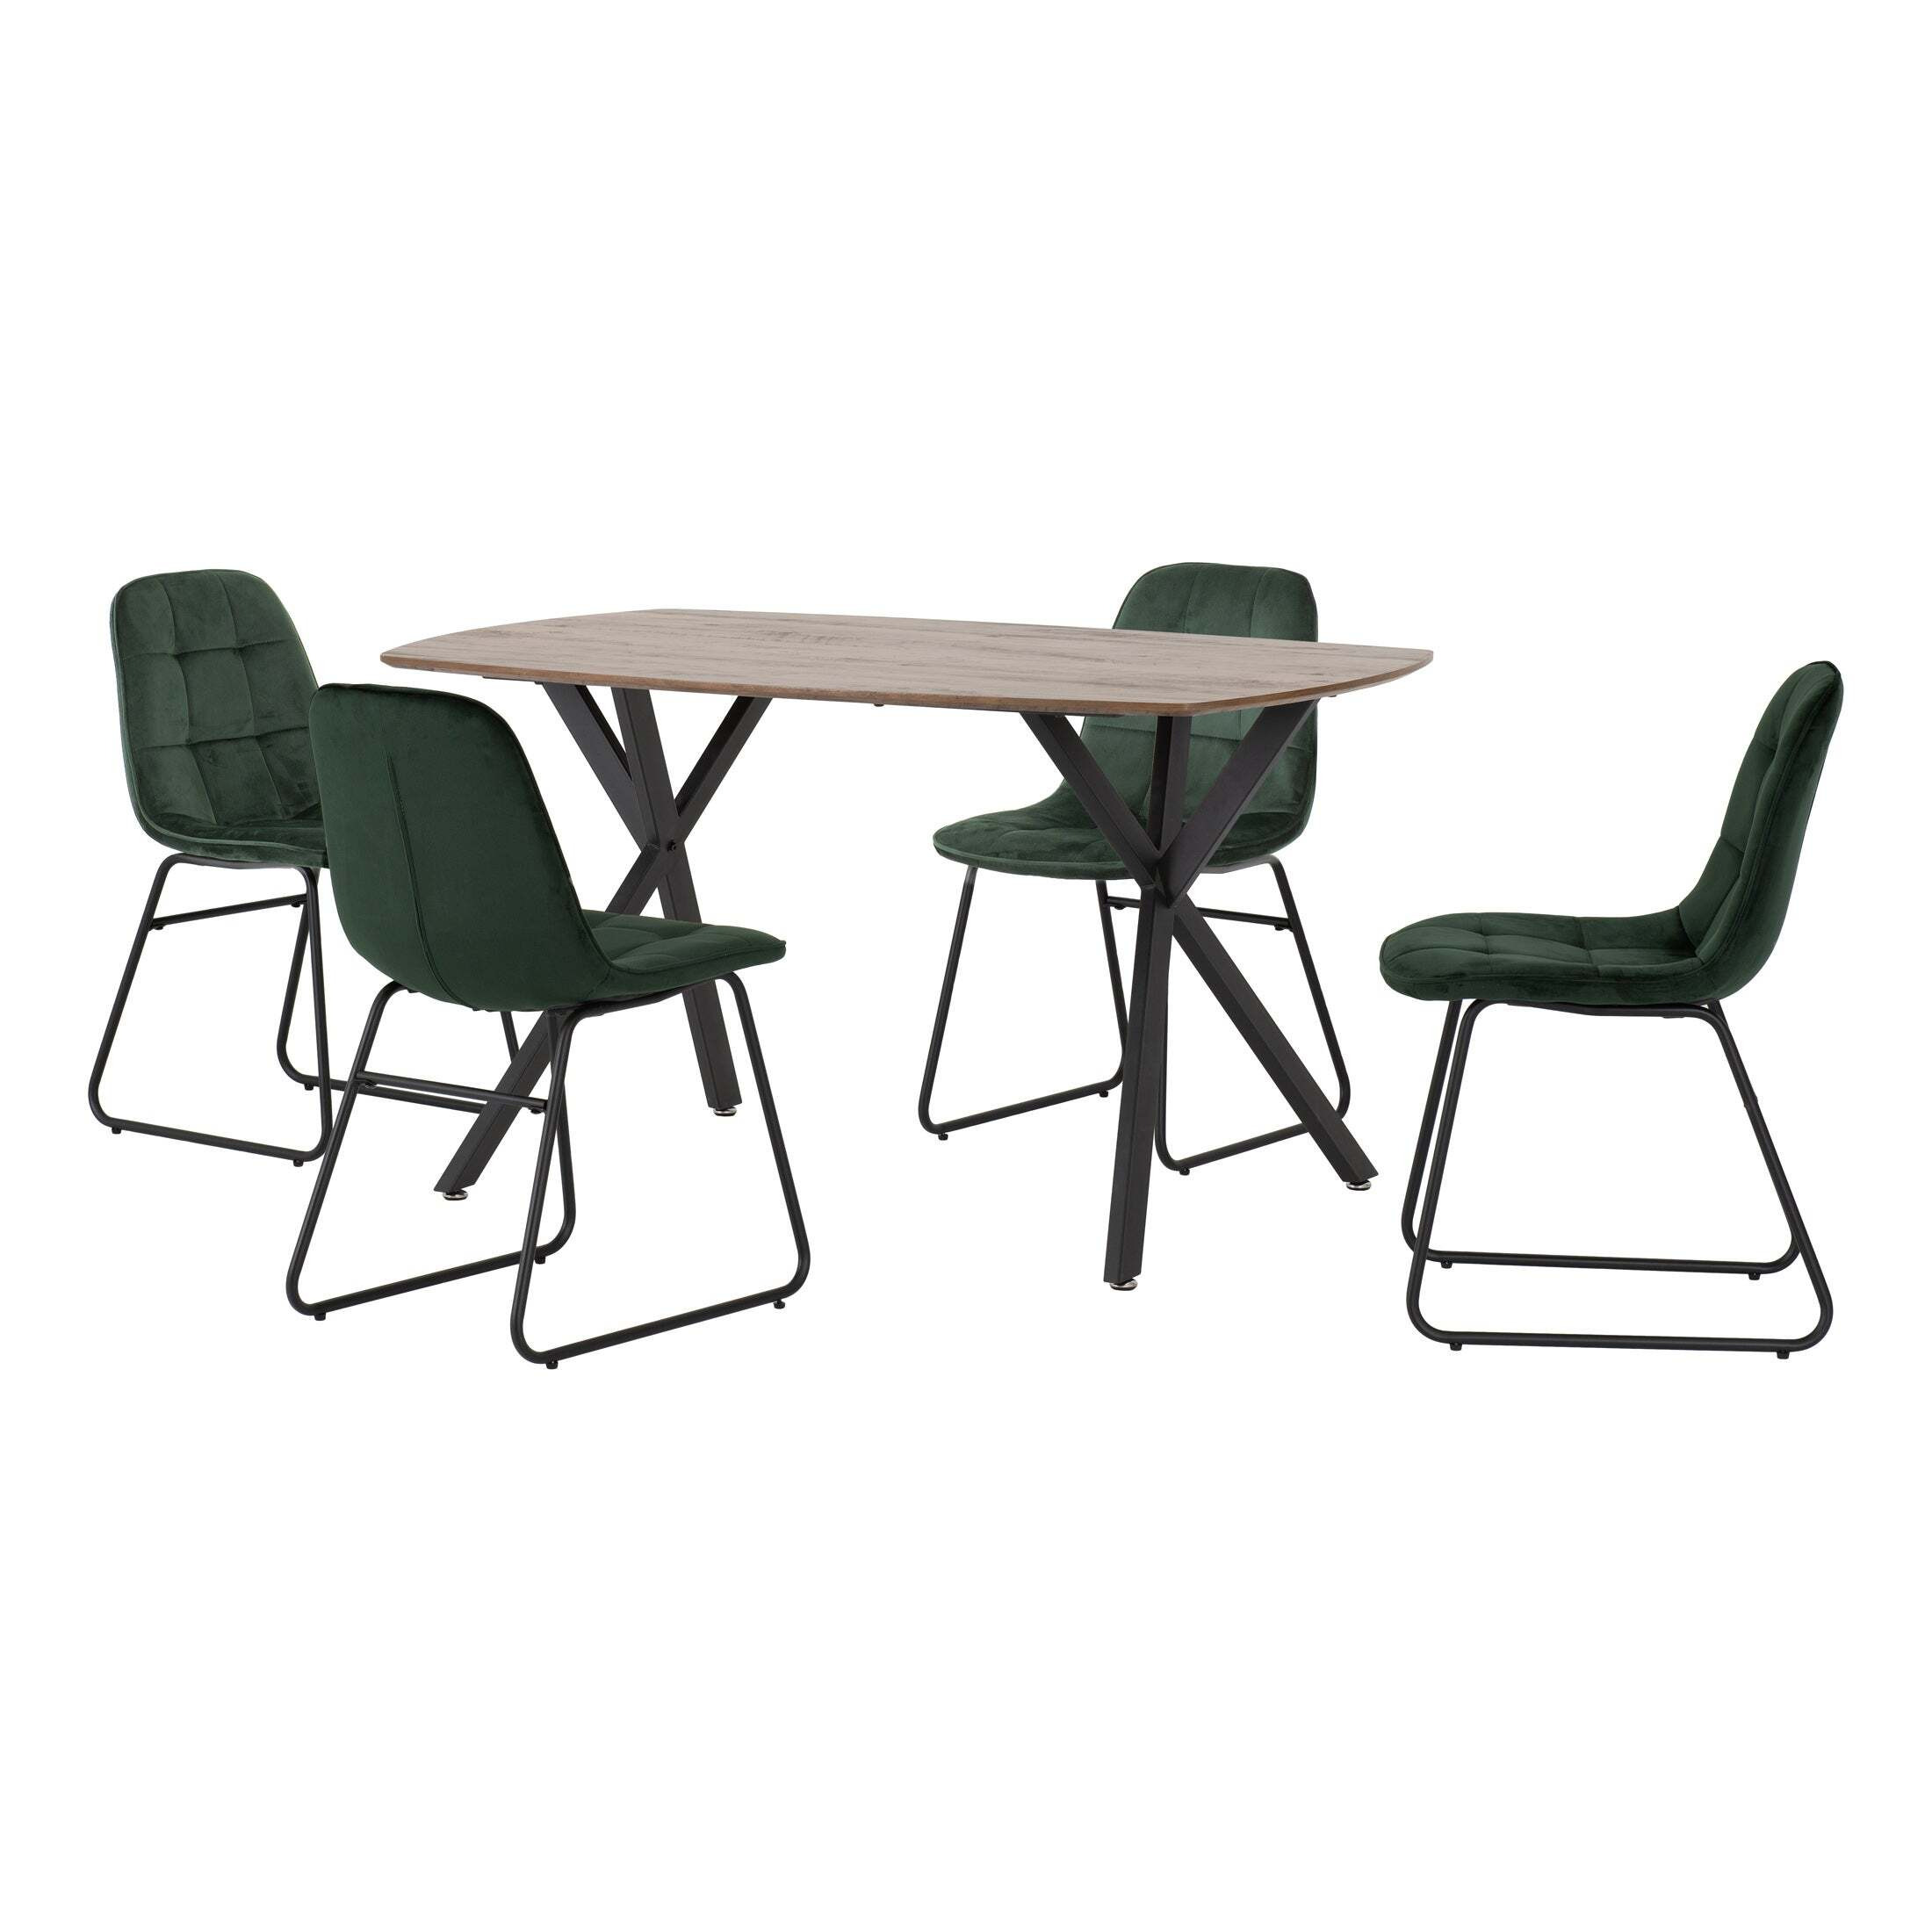 Athens Rectangular Dining Table with 4 Lukas Chairs, Oak Effect Green